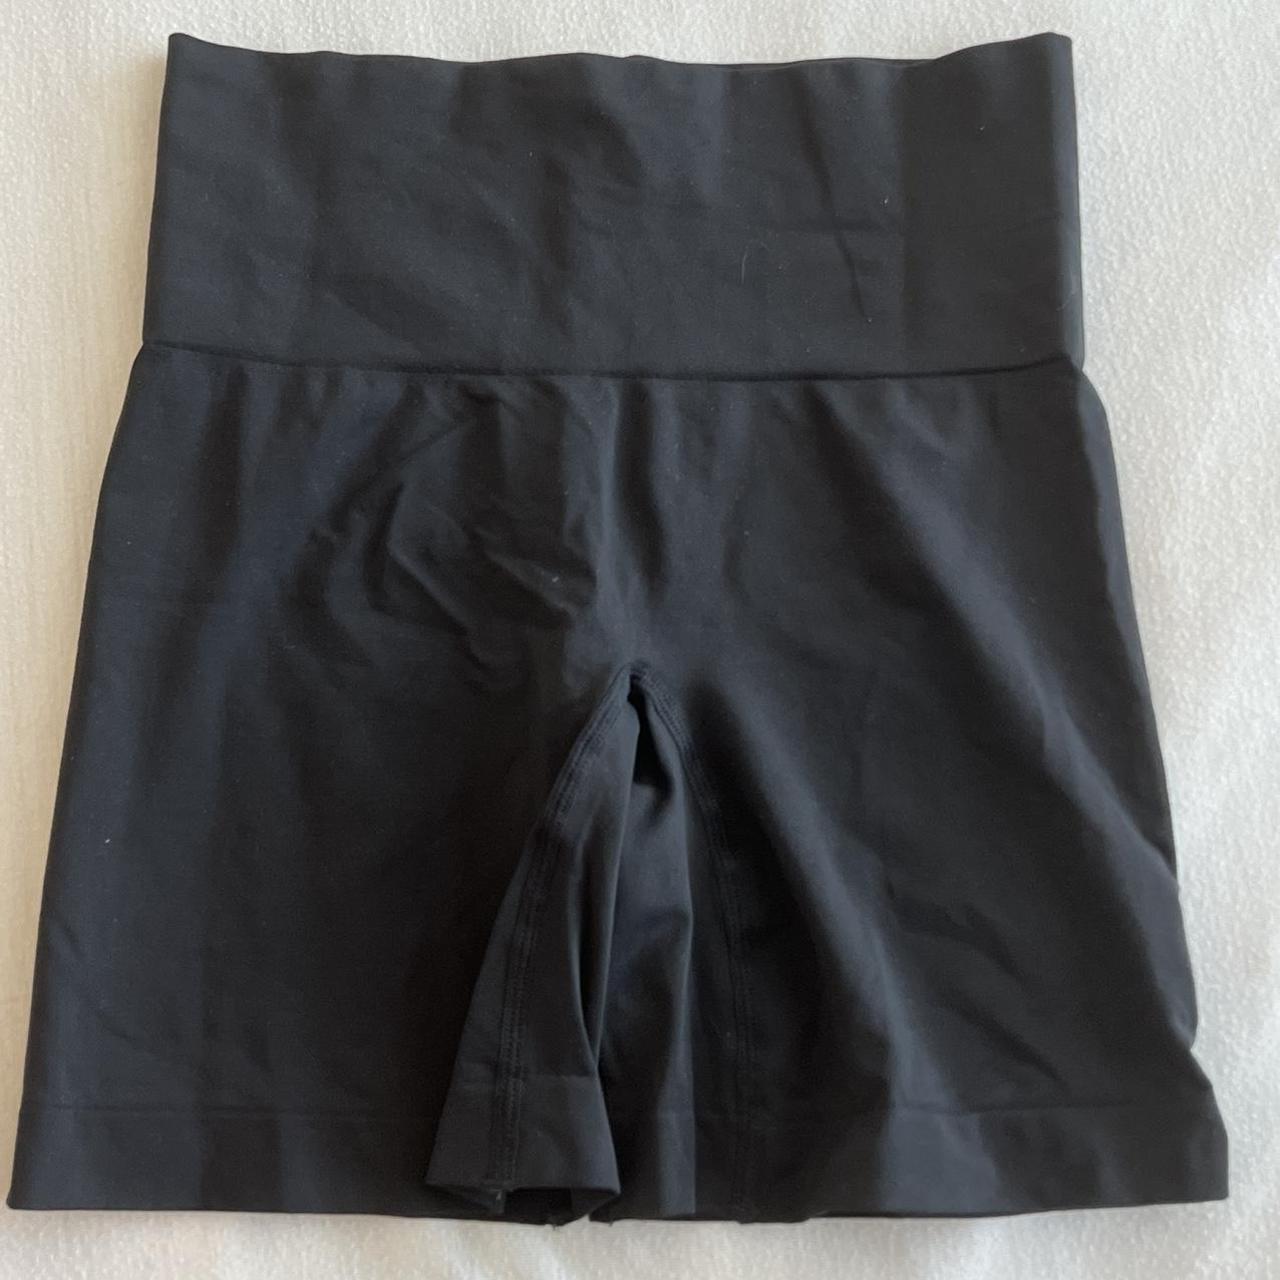 Skims Soft Smoothing Short in Black - size small - - Depop